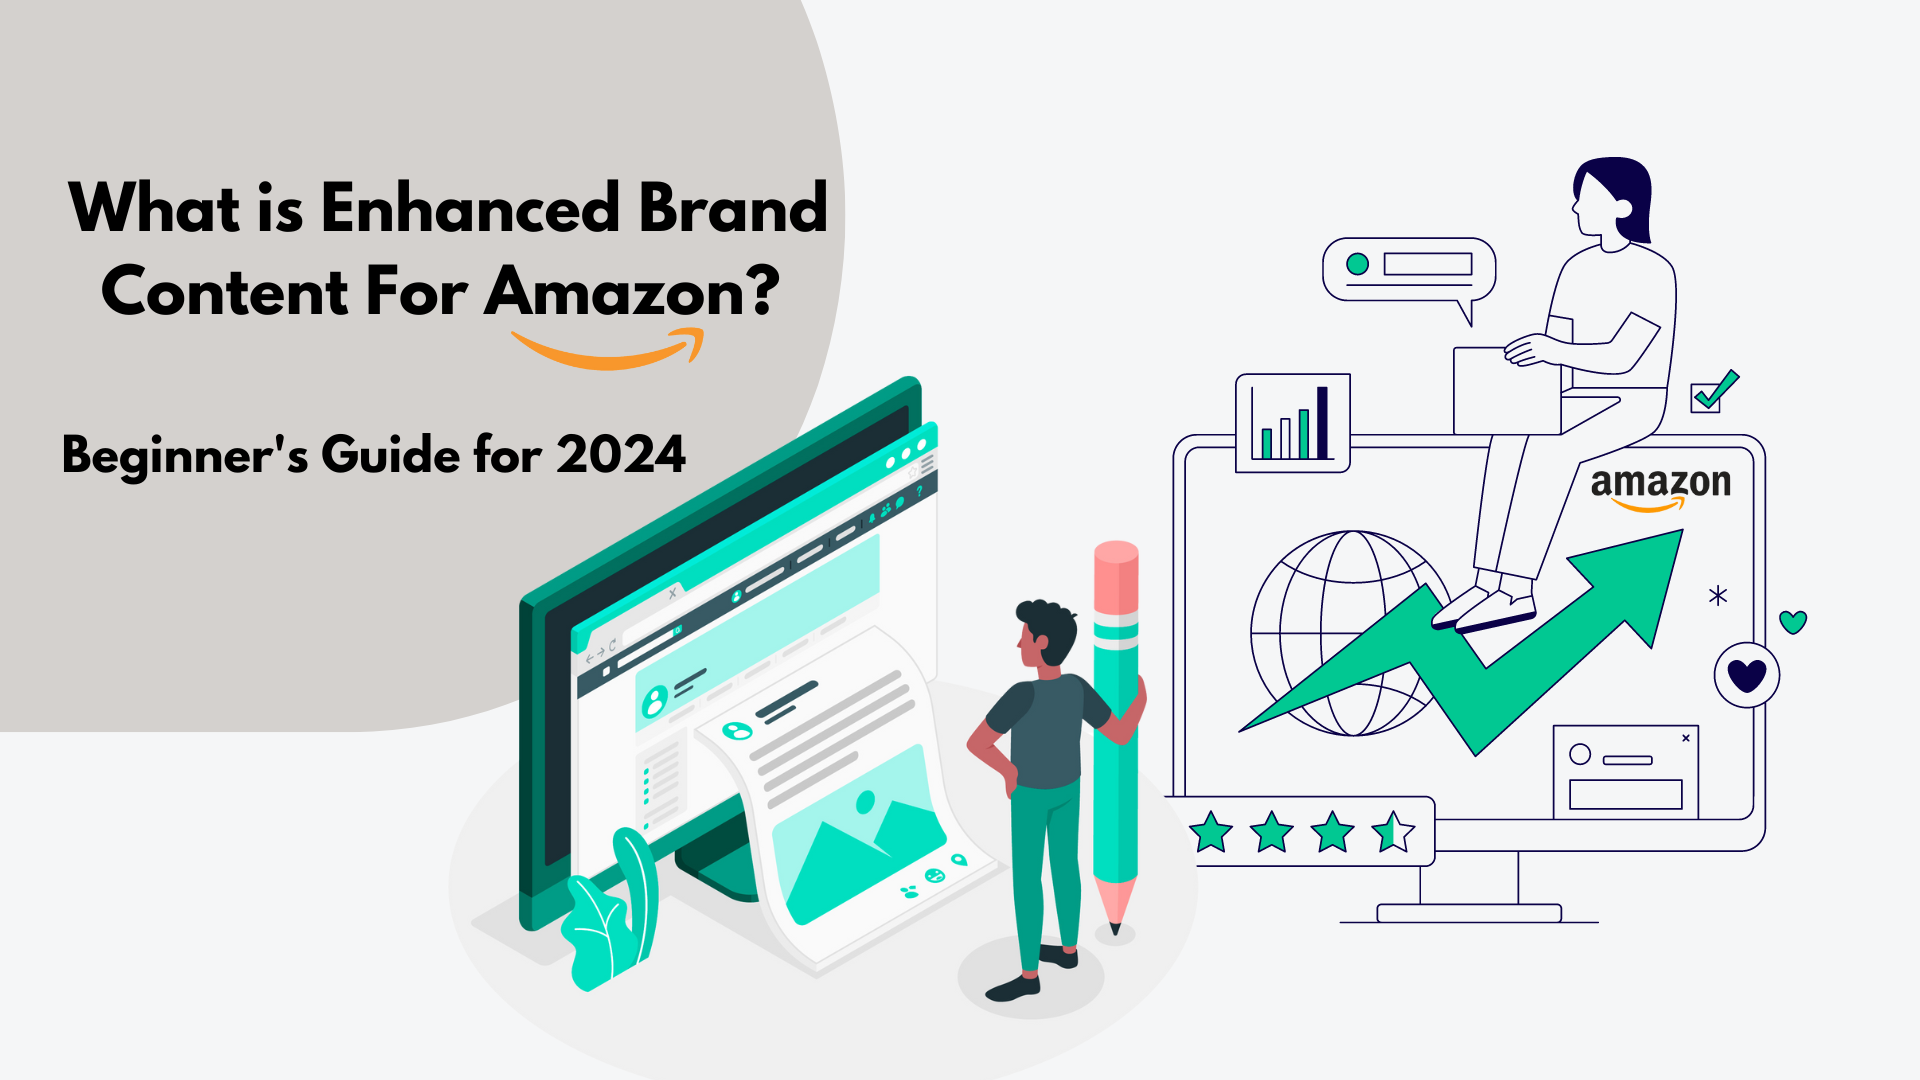 What is EBC? Beginner's Guide to Amazon Content 2024